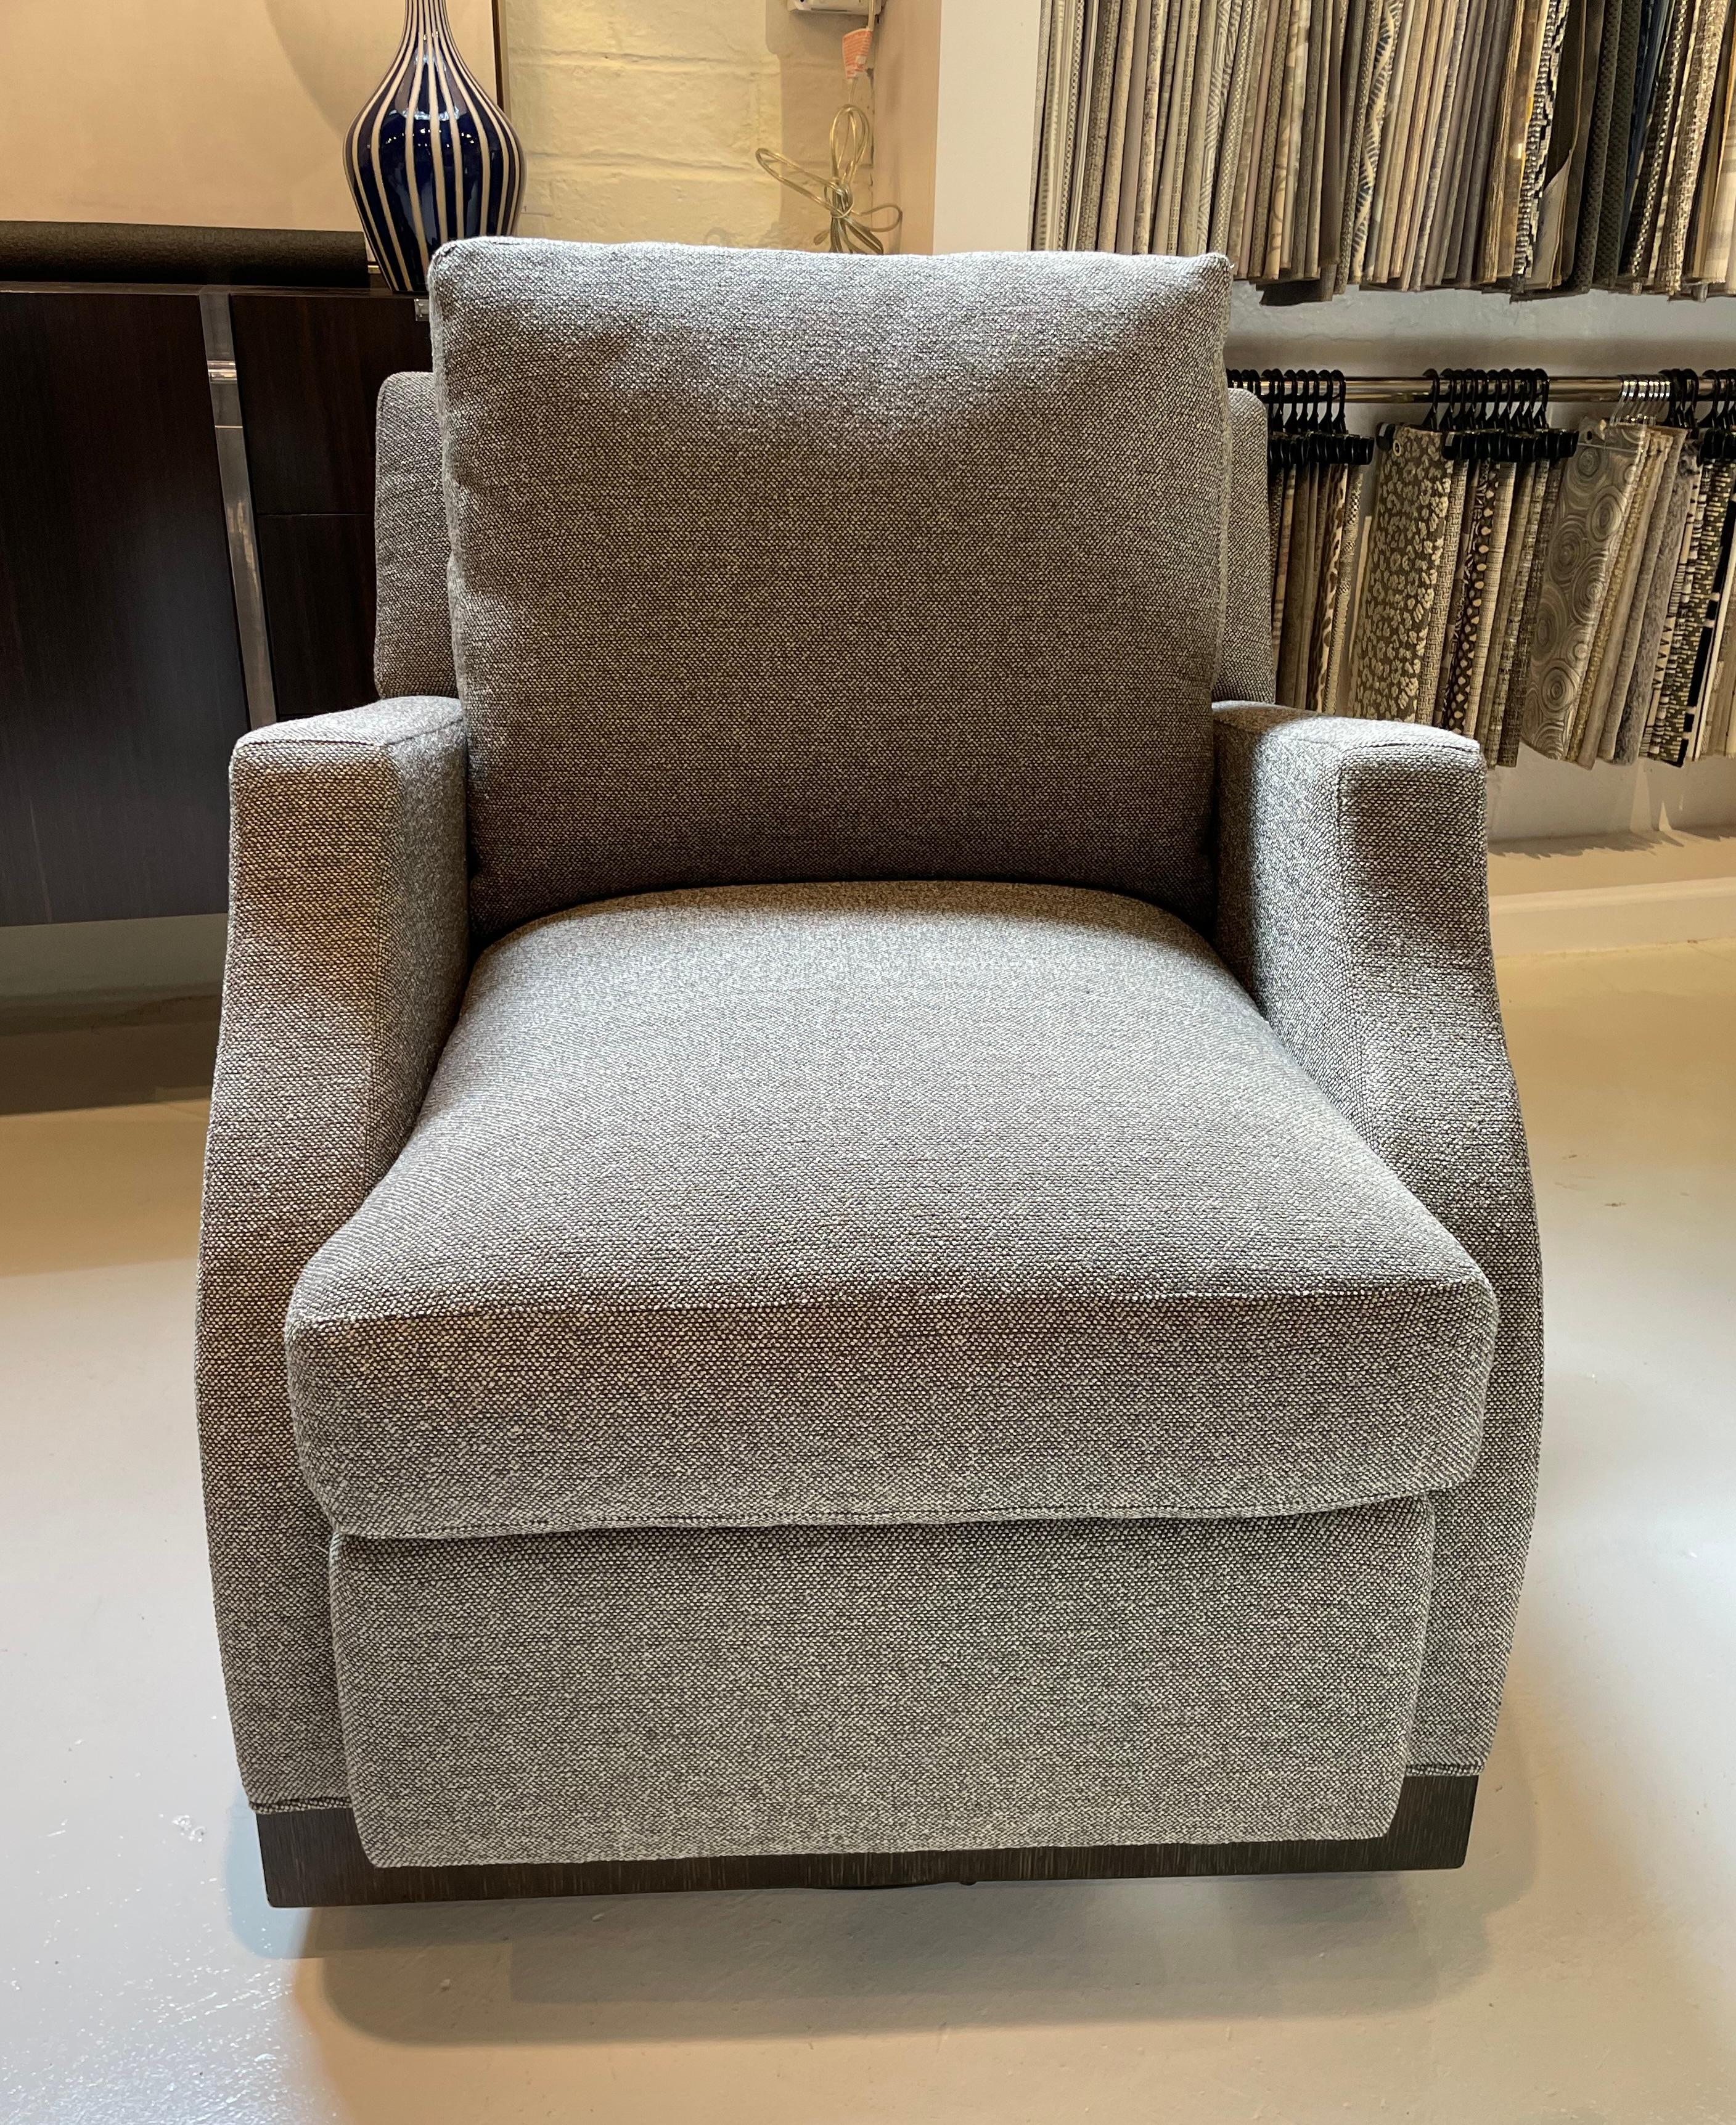 The Wilshire Swivel Chair is Stylish and Comfortable with a 360 Degree Swivel.  The Clean Design Lends itself to a Contemporary, Transitional or Traditional Setting.  Ideal for the Living Room, Family Room, Bedroom or a Cozy Nook. The Wilshire is